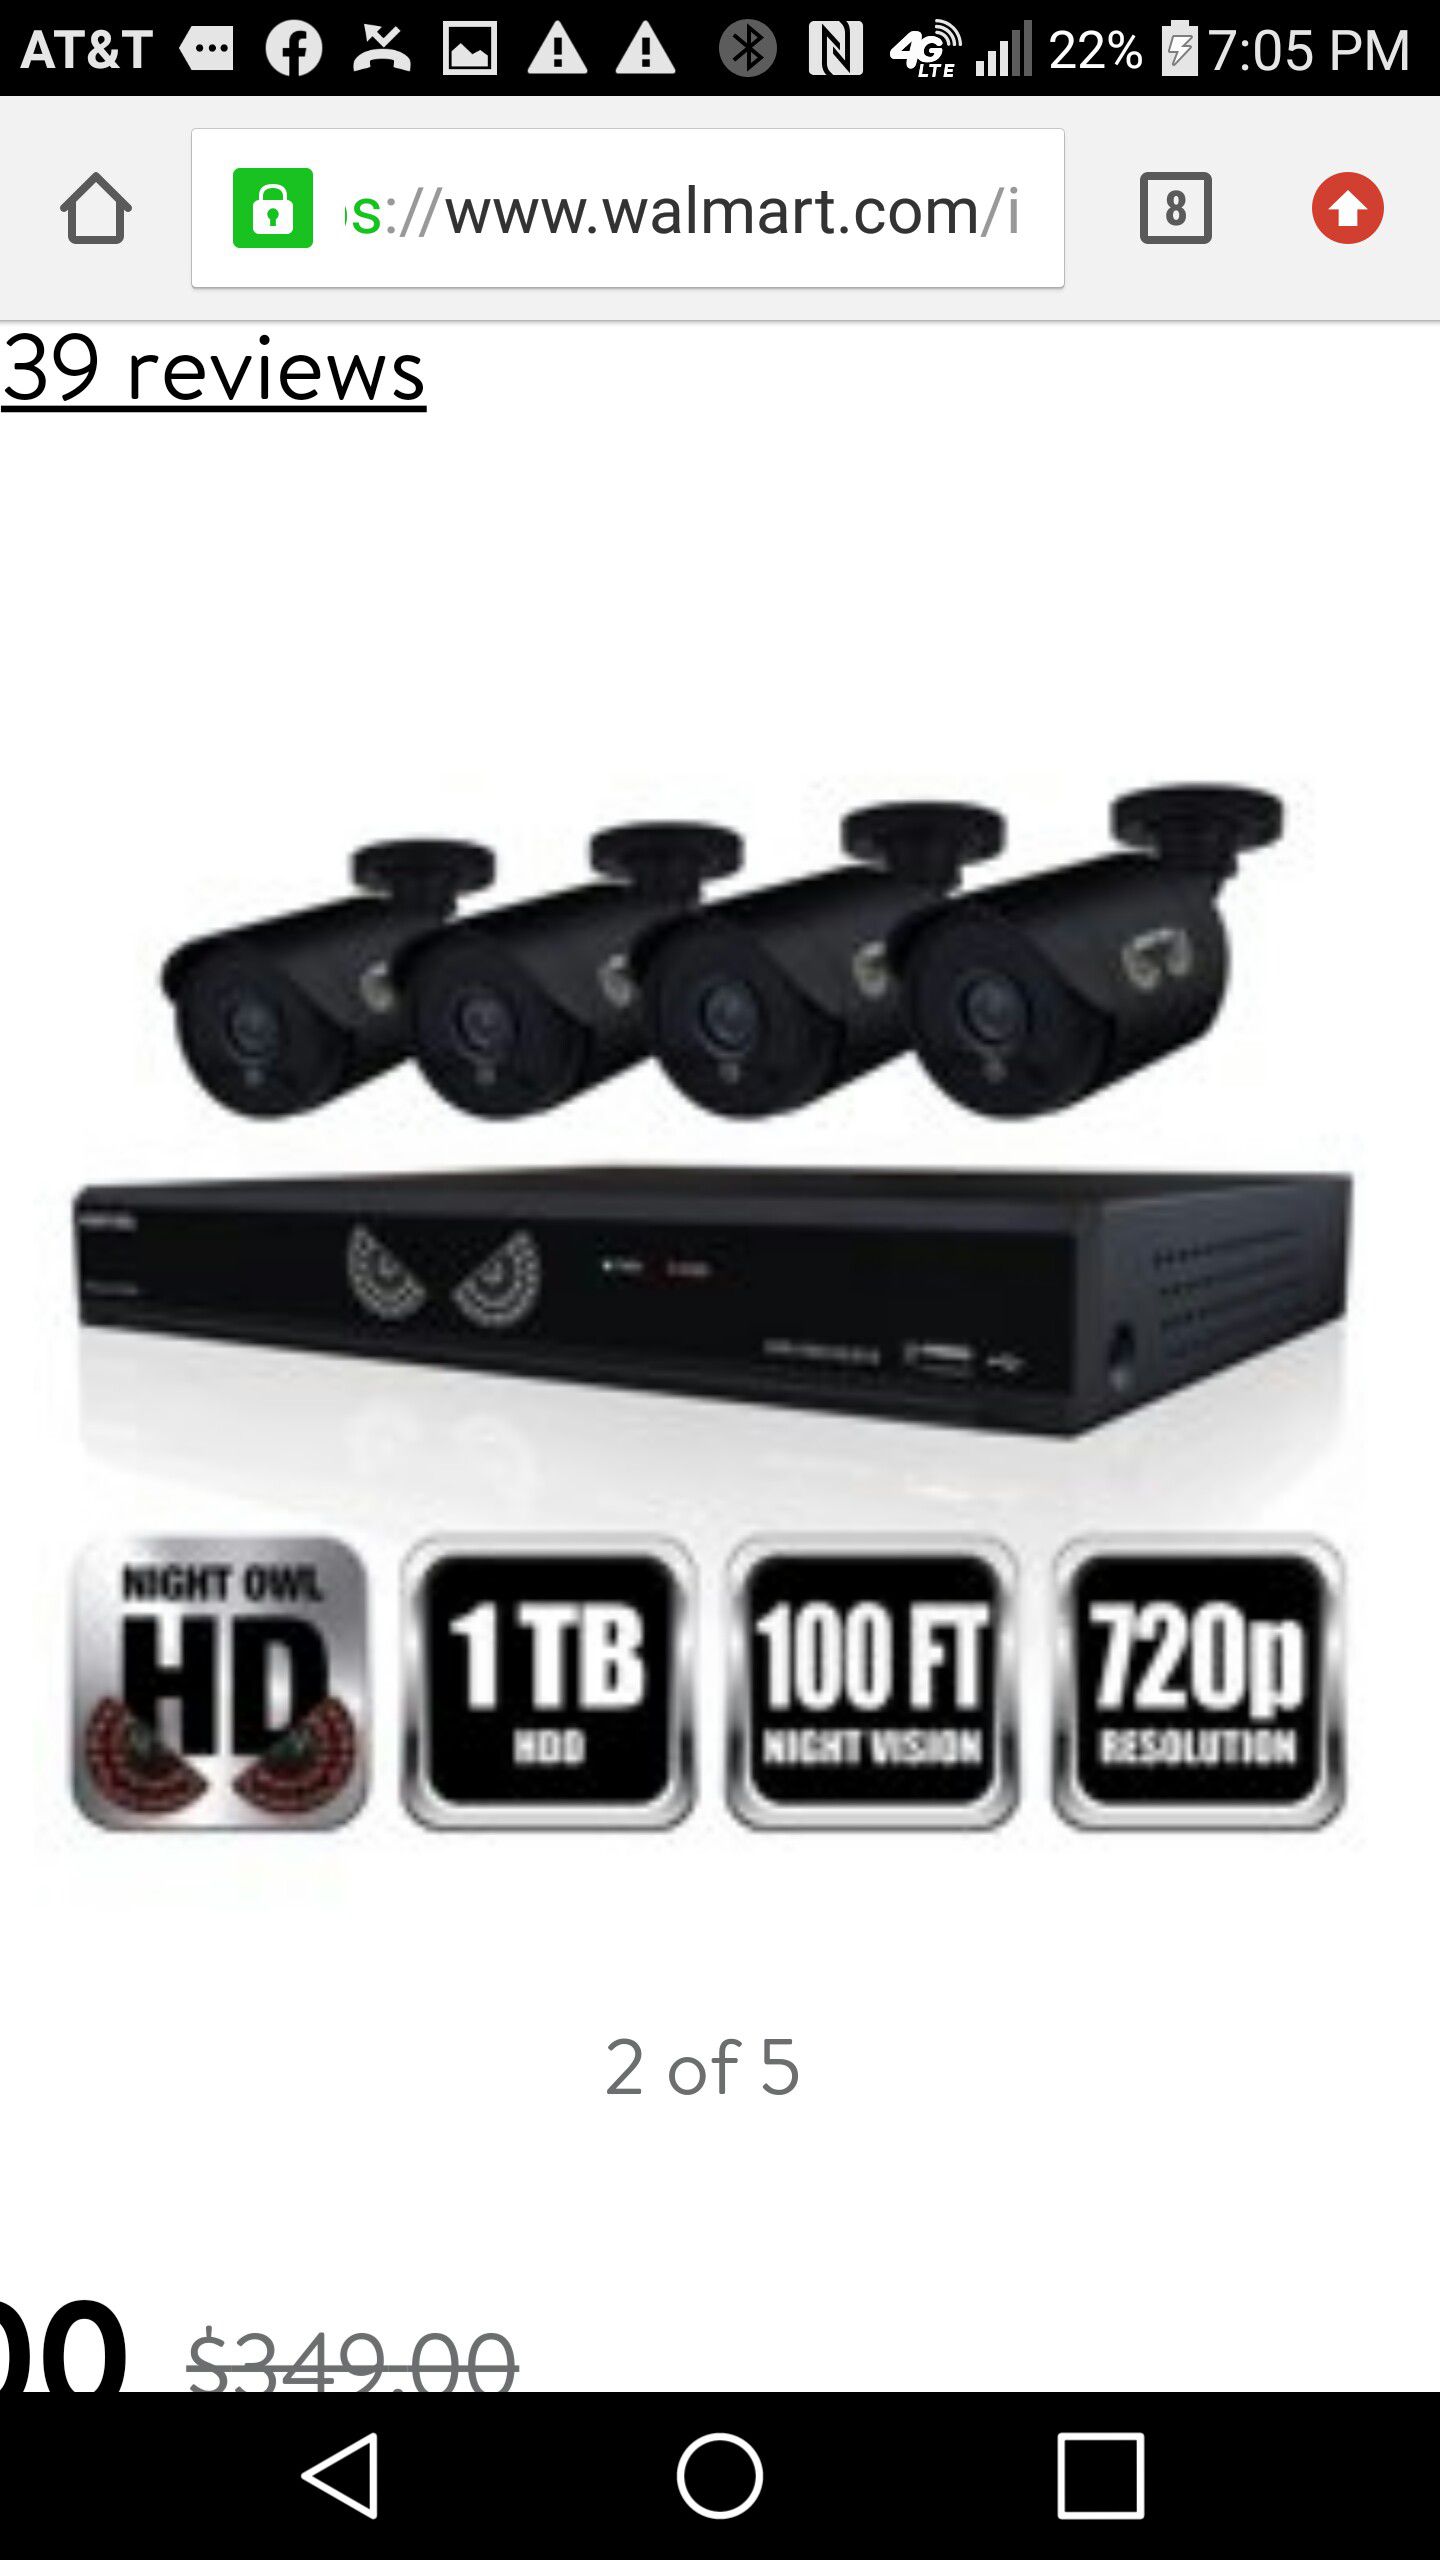 Night Owl Wired Security System w/ 4 cameras